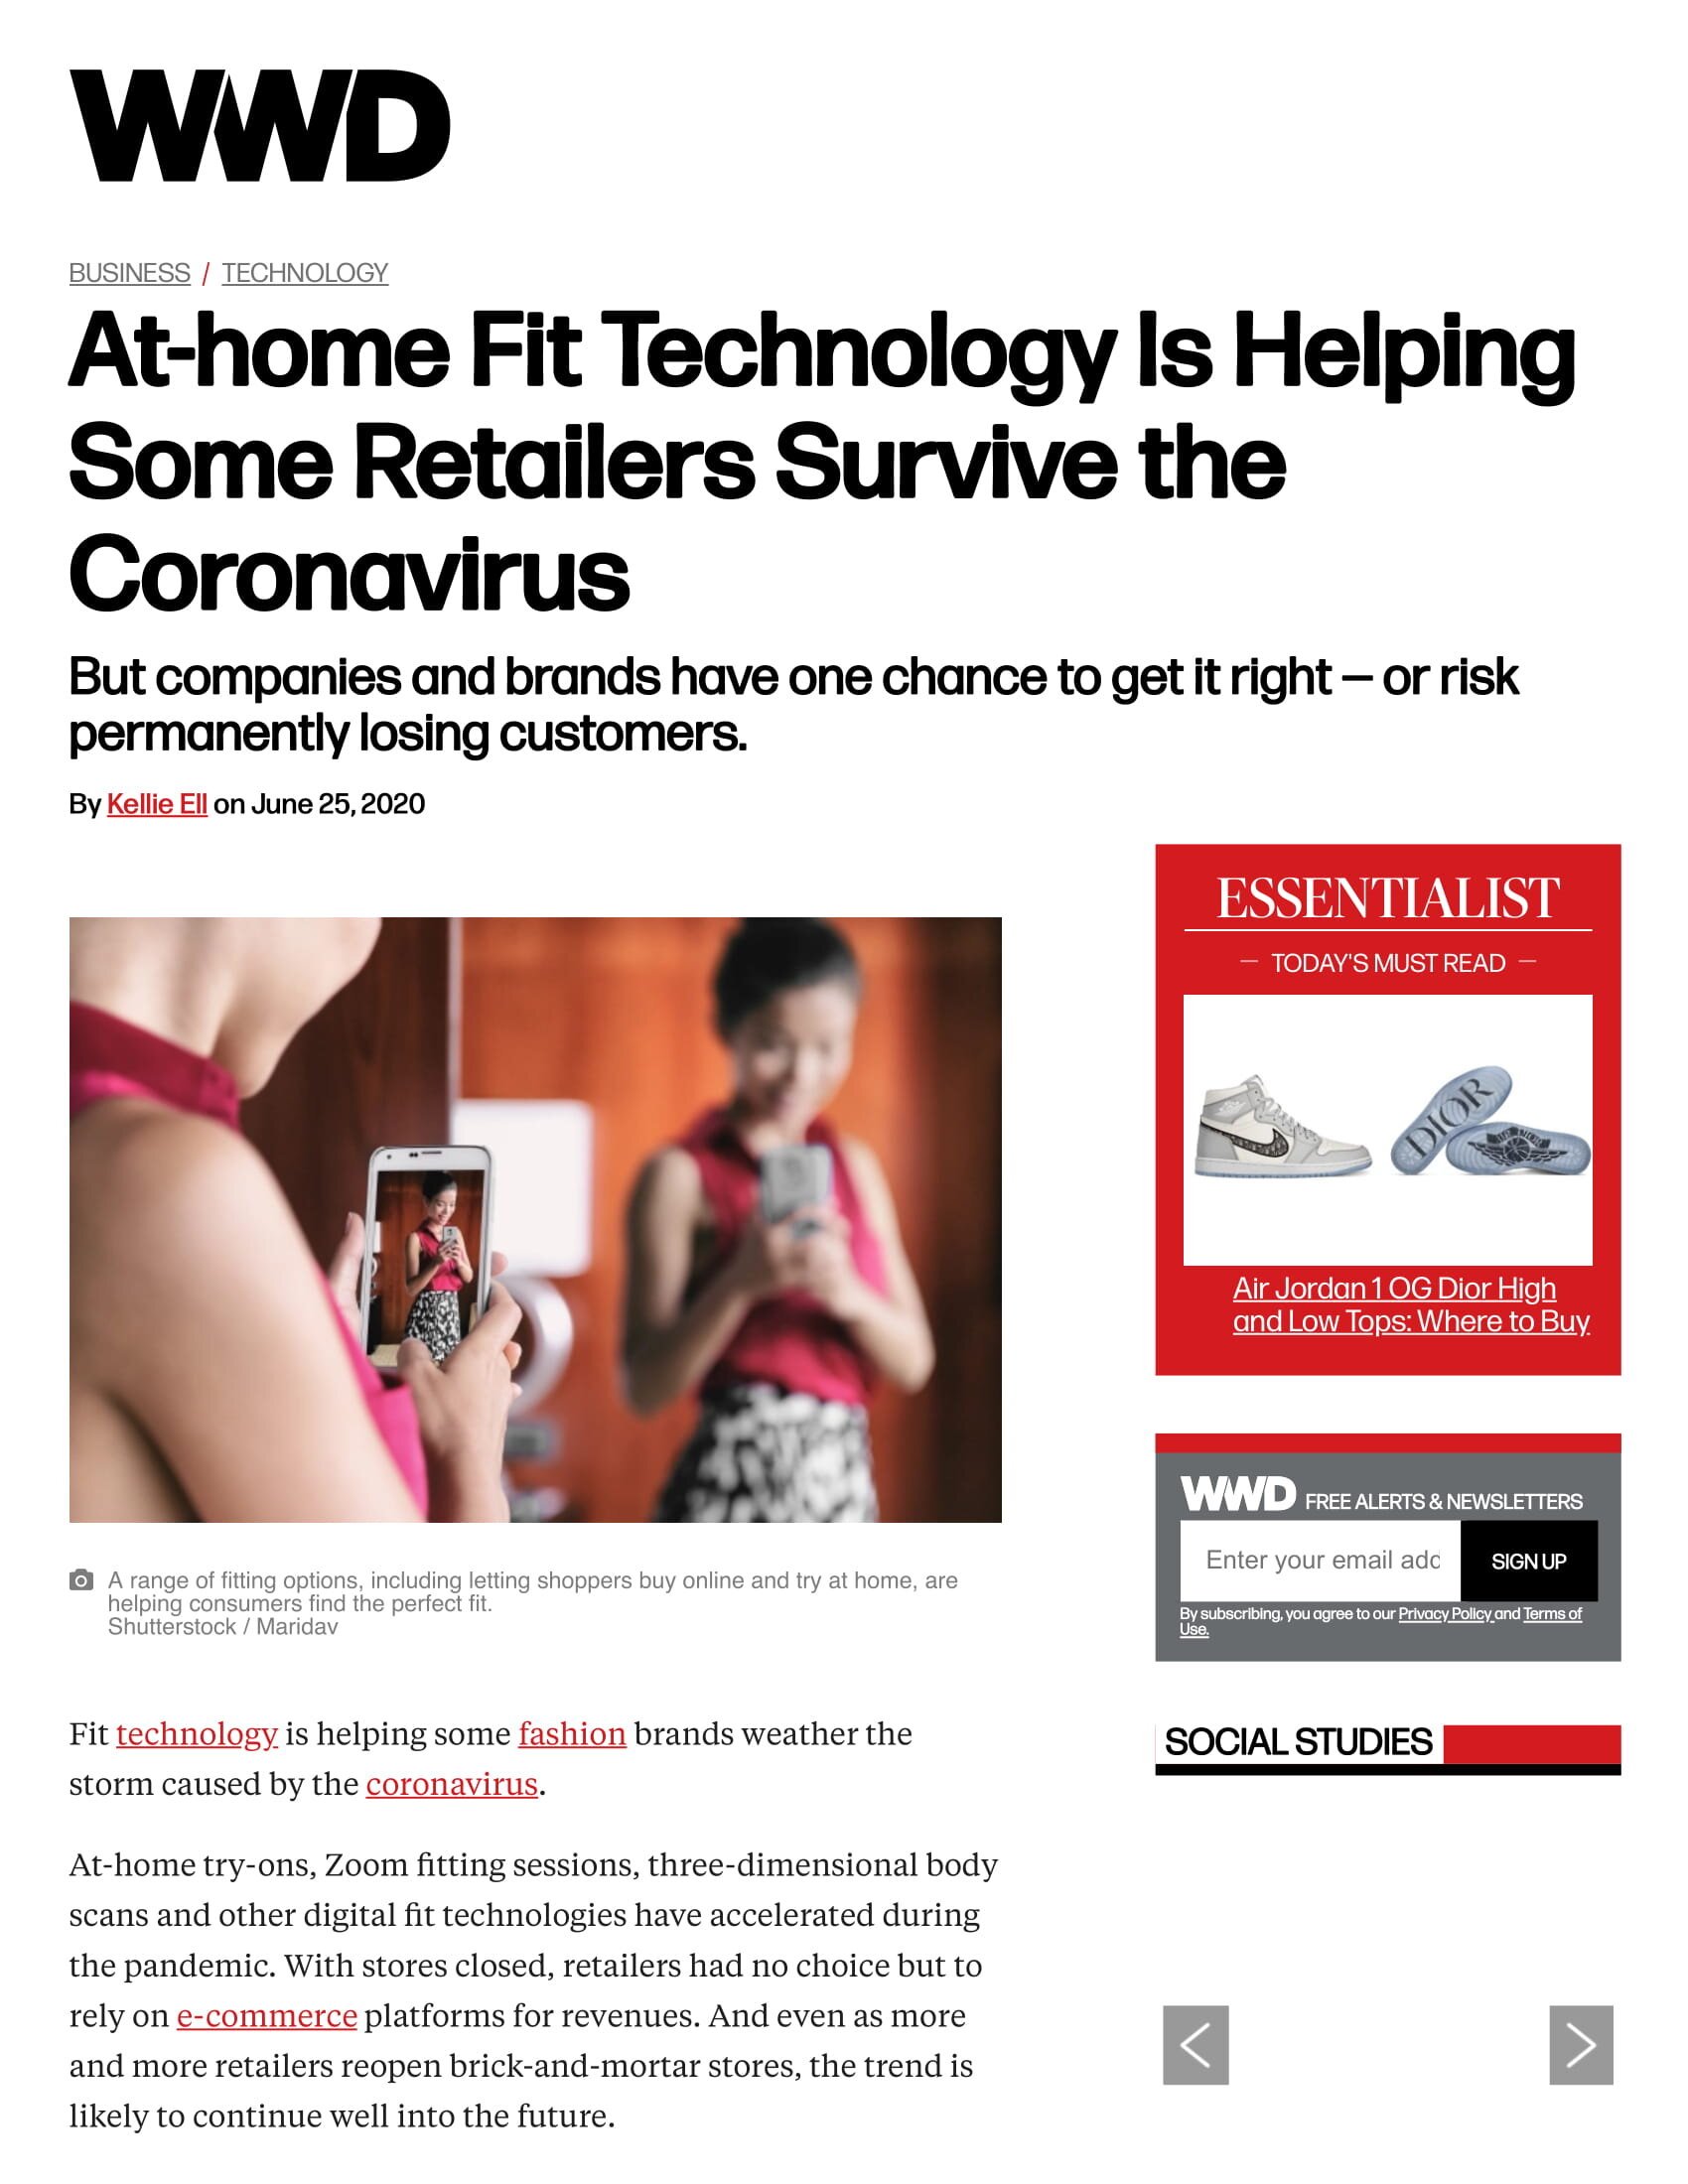 At-home Fit Technology – June 2020 - WWD-1.jpg